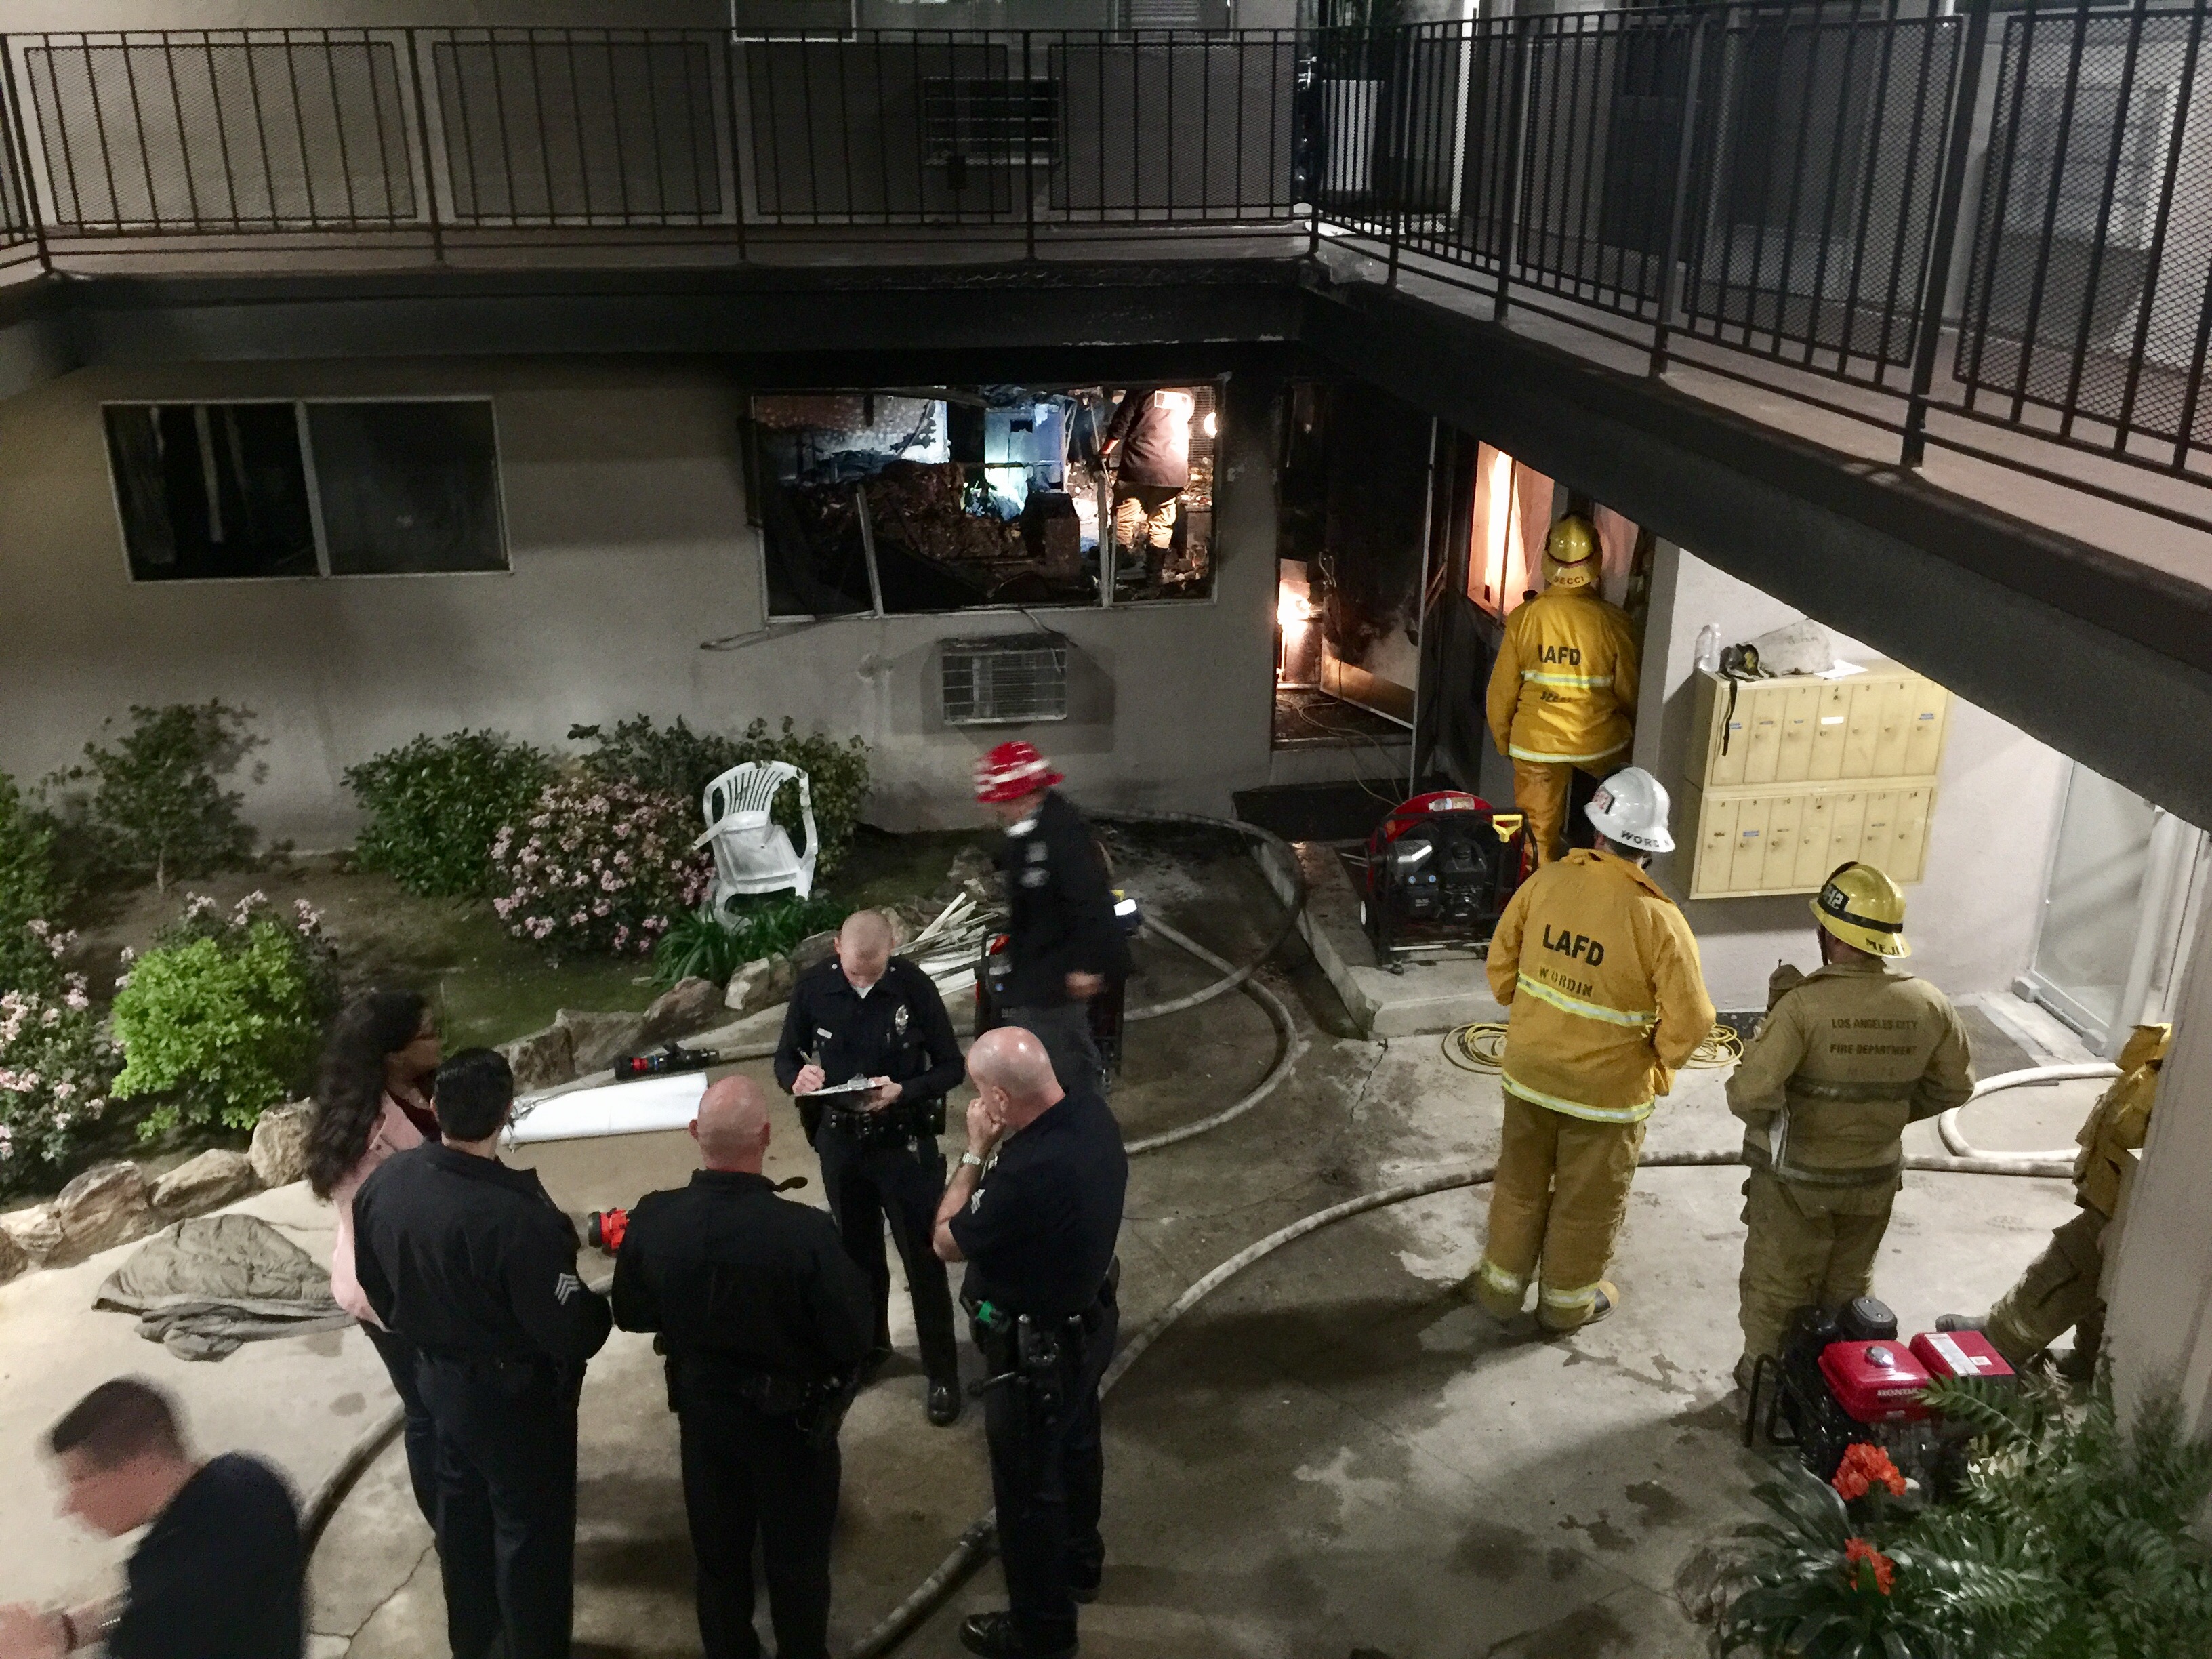 LAFD and LAPD at the scene of a deadly April 1, 2017 apartment fire in Tujunga